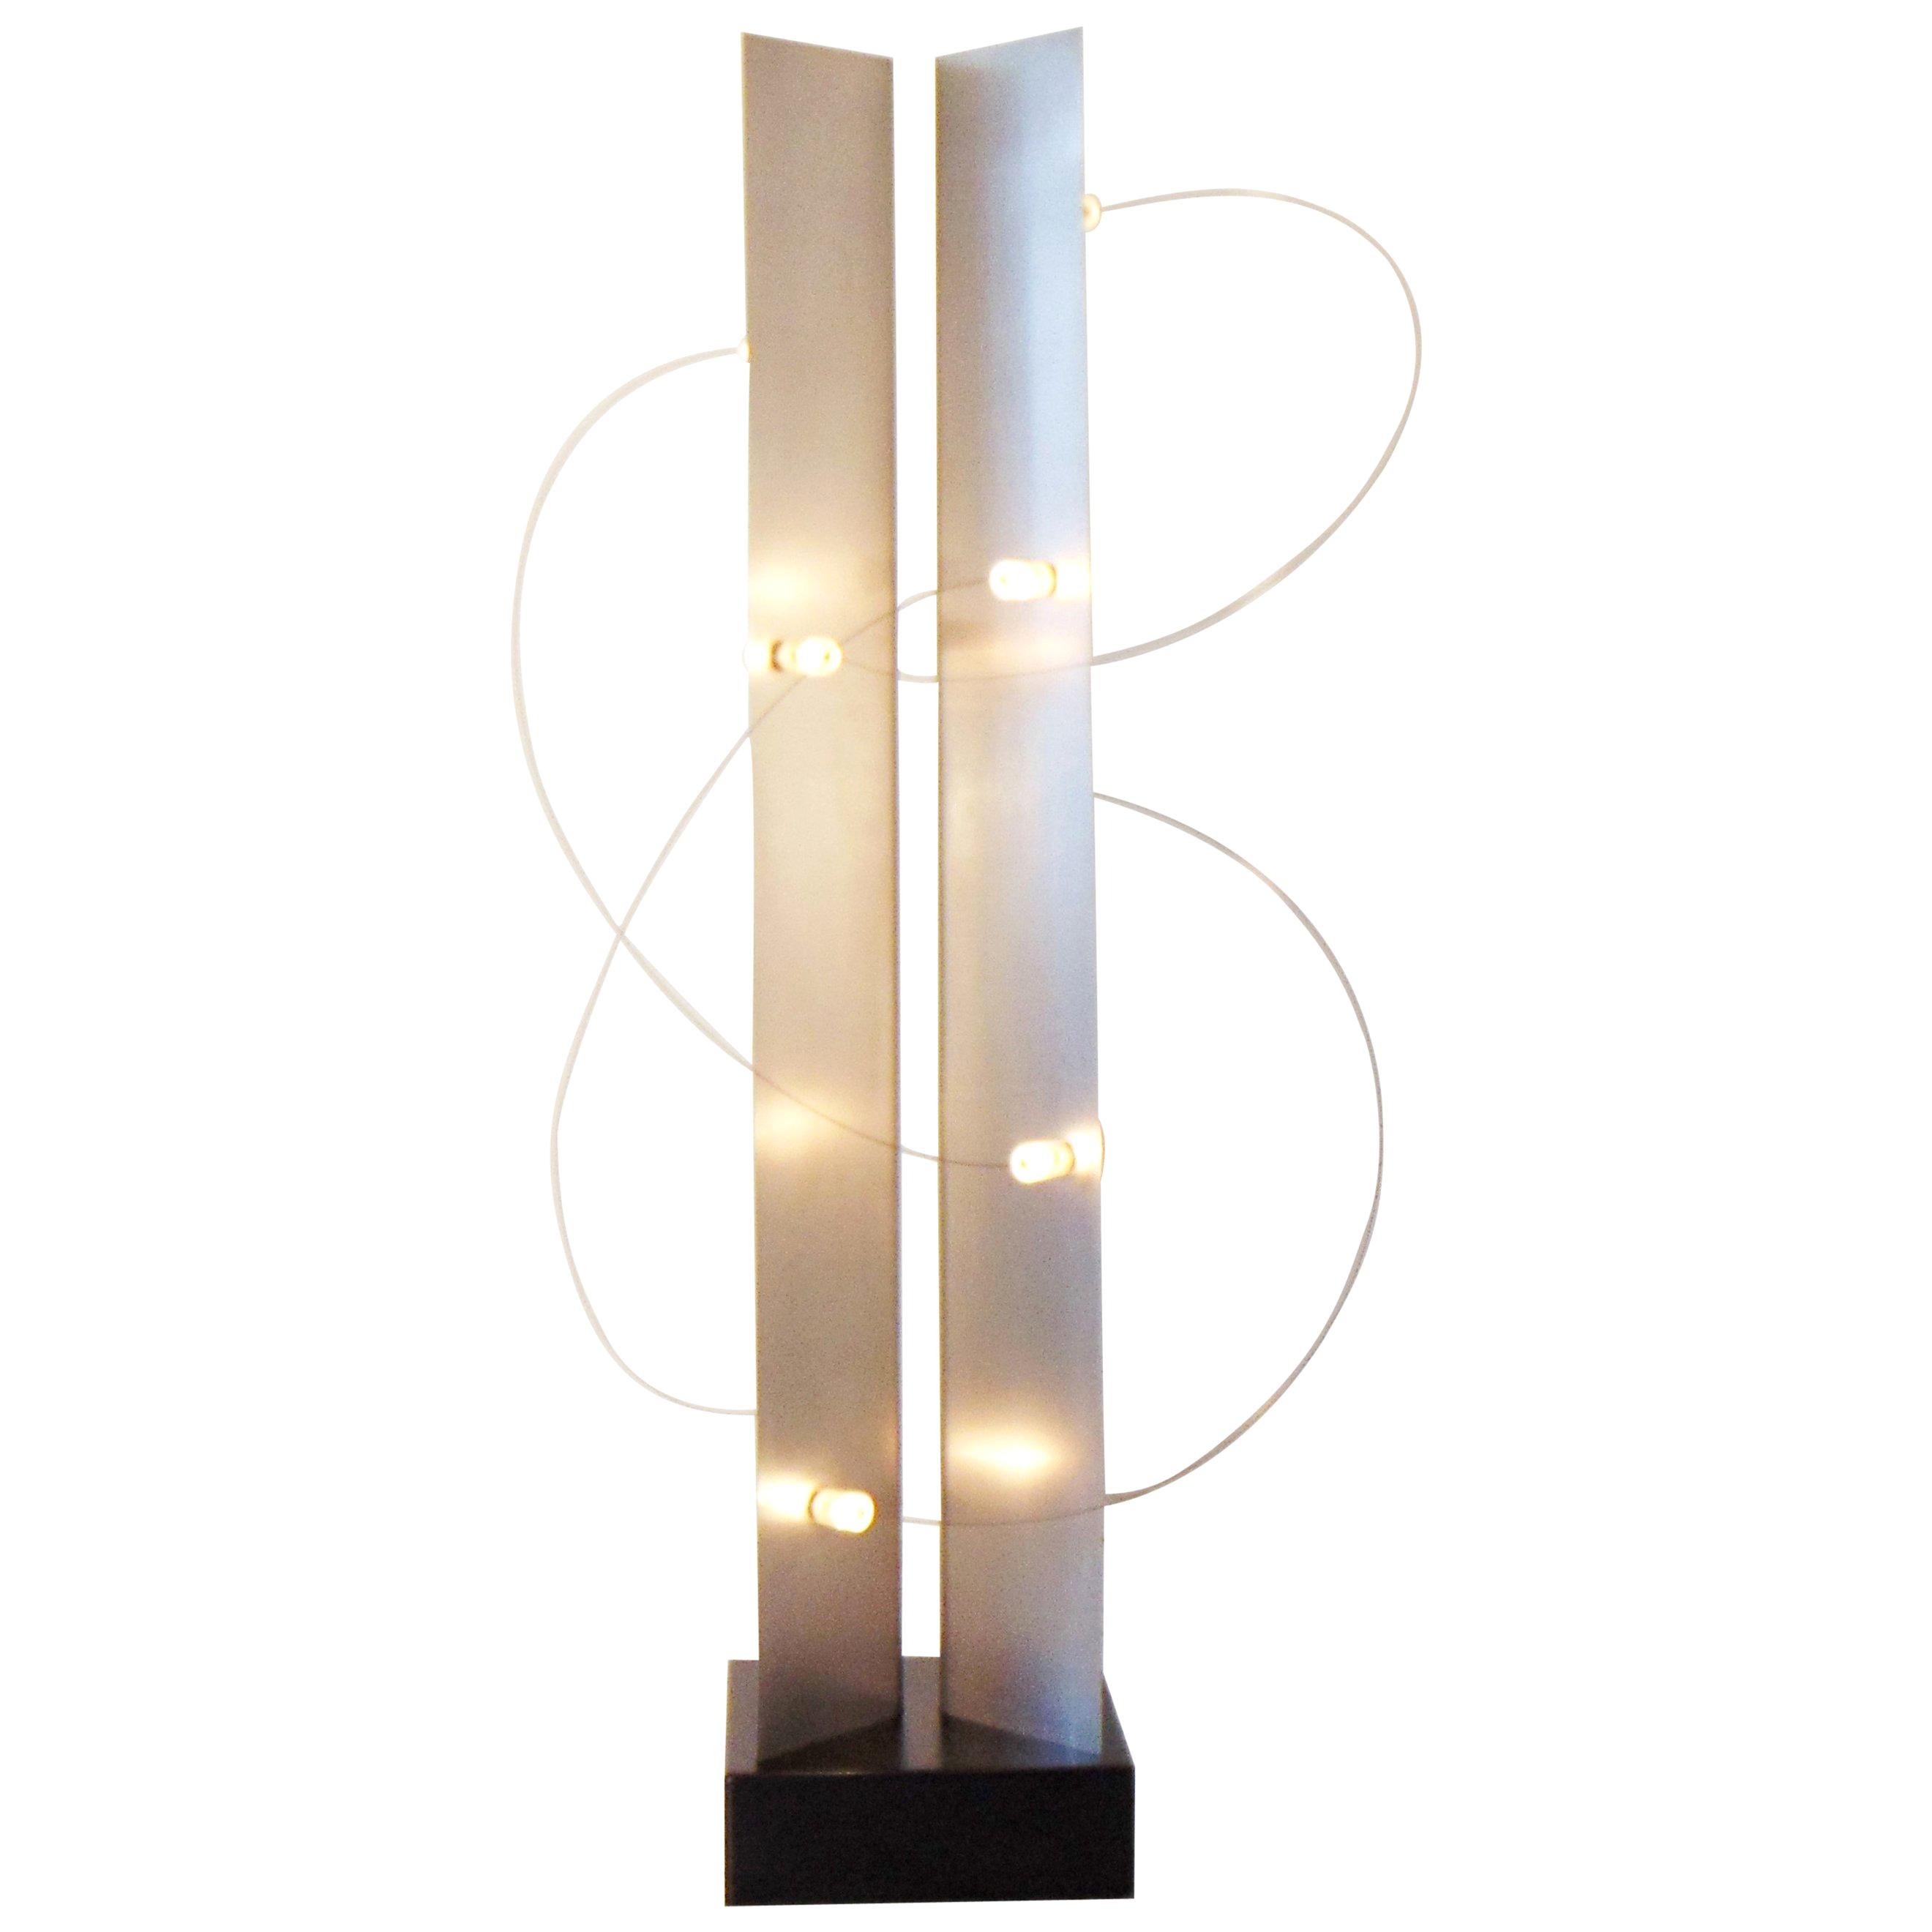 Studio A.R.D.I.T.I. Floor Lamp for Sormani Nucleo Italy 1975, Steel, Lucite